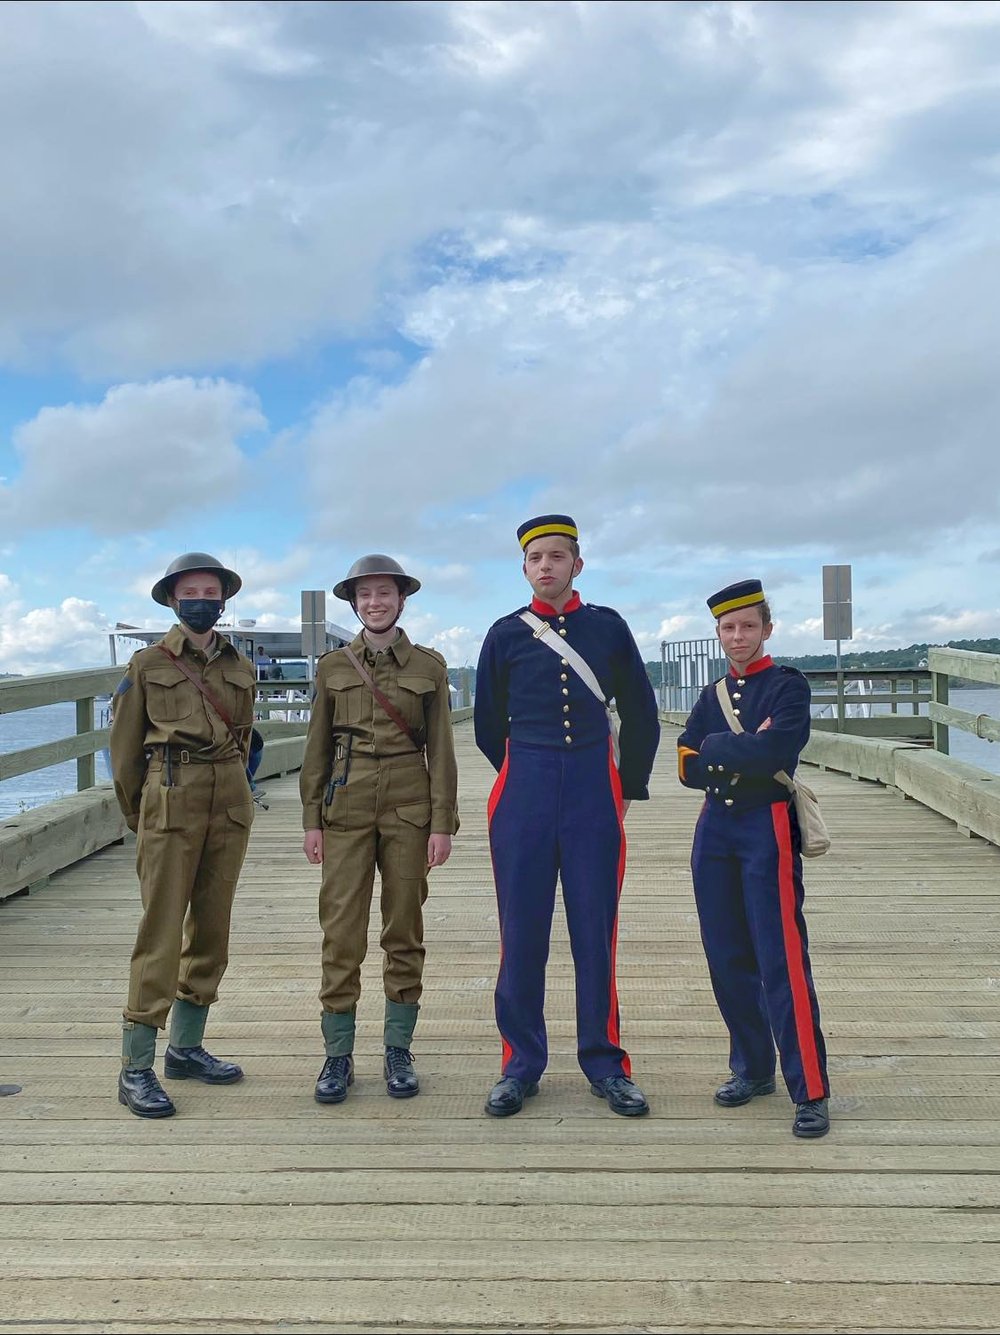  Guides in period military costumes from World War 2 and the 1800s. 